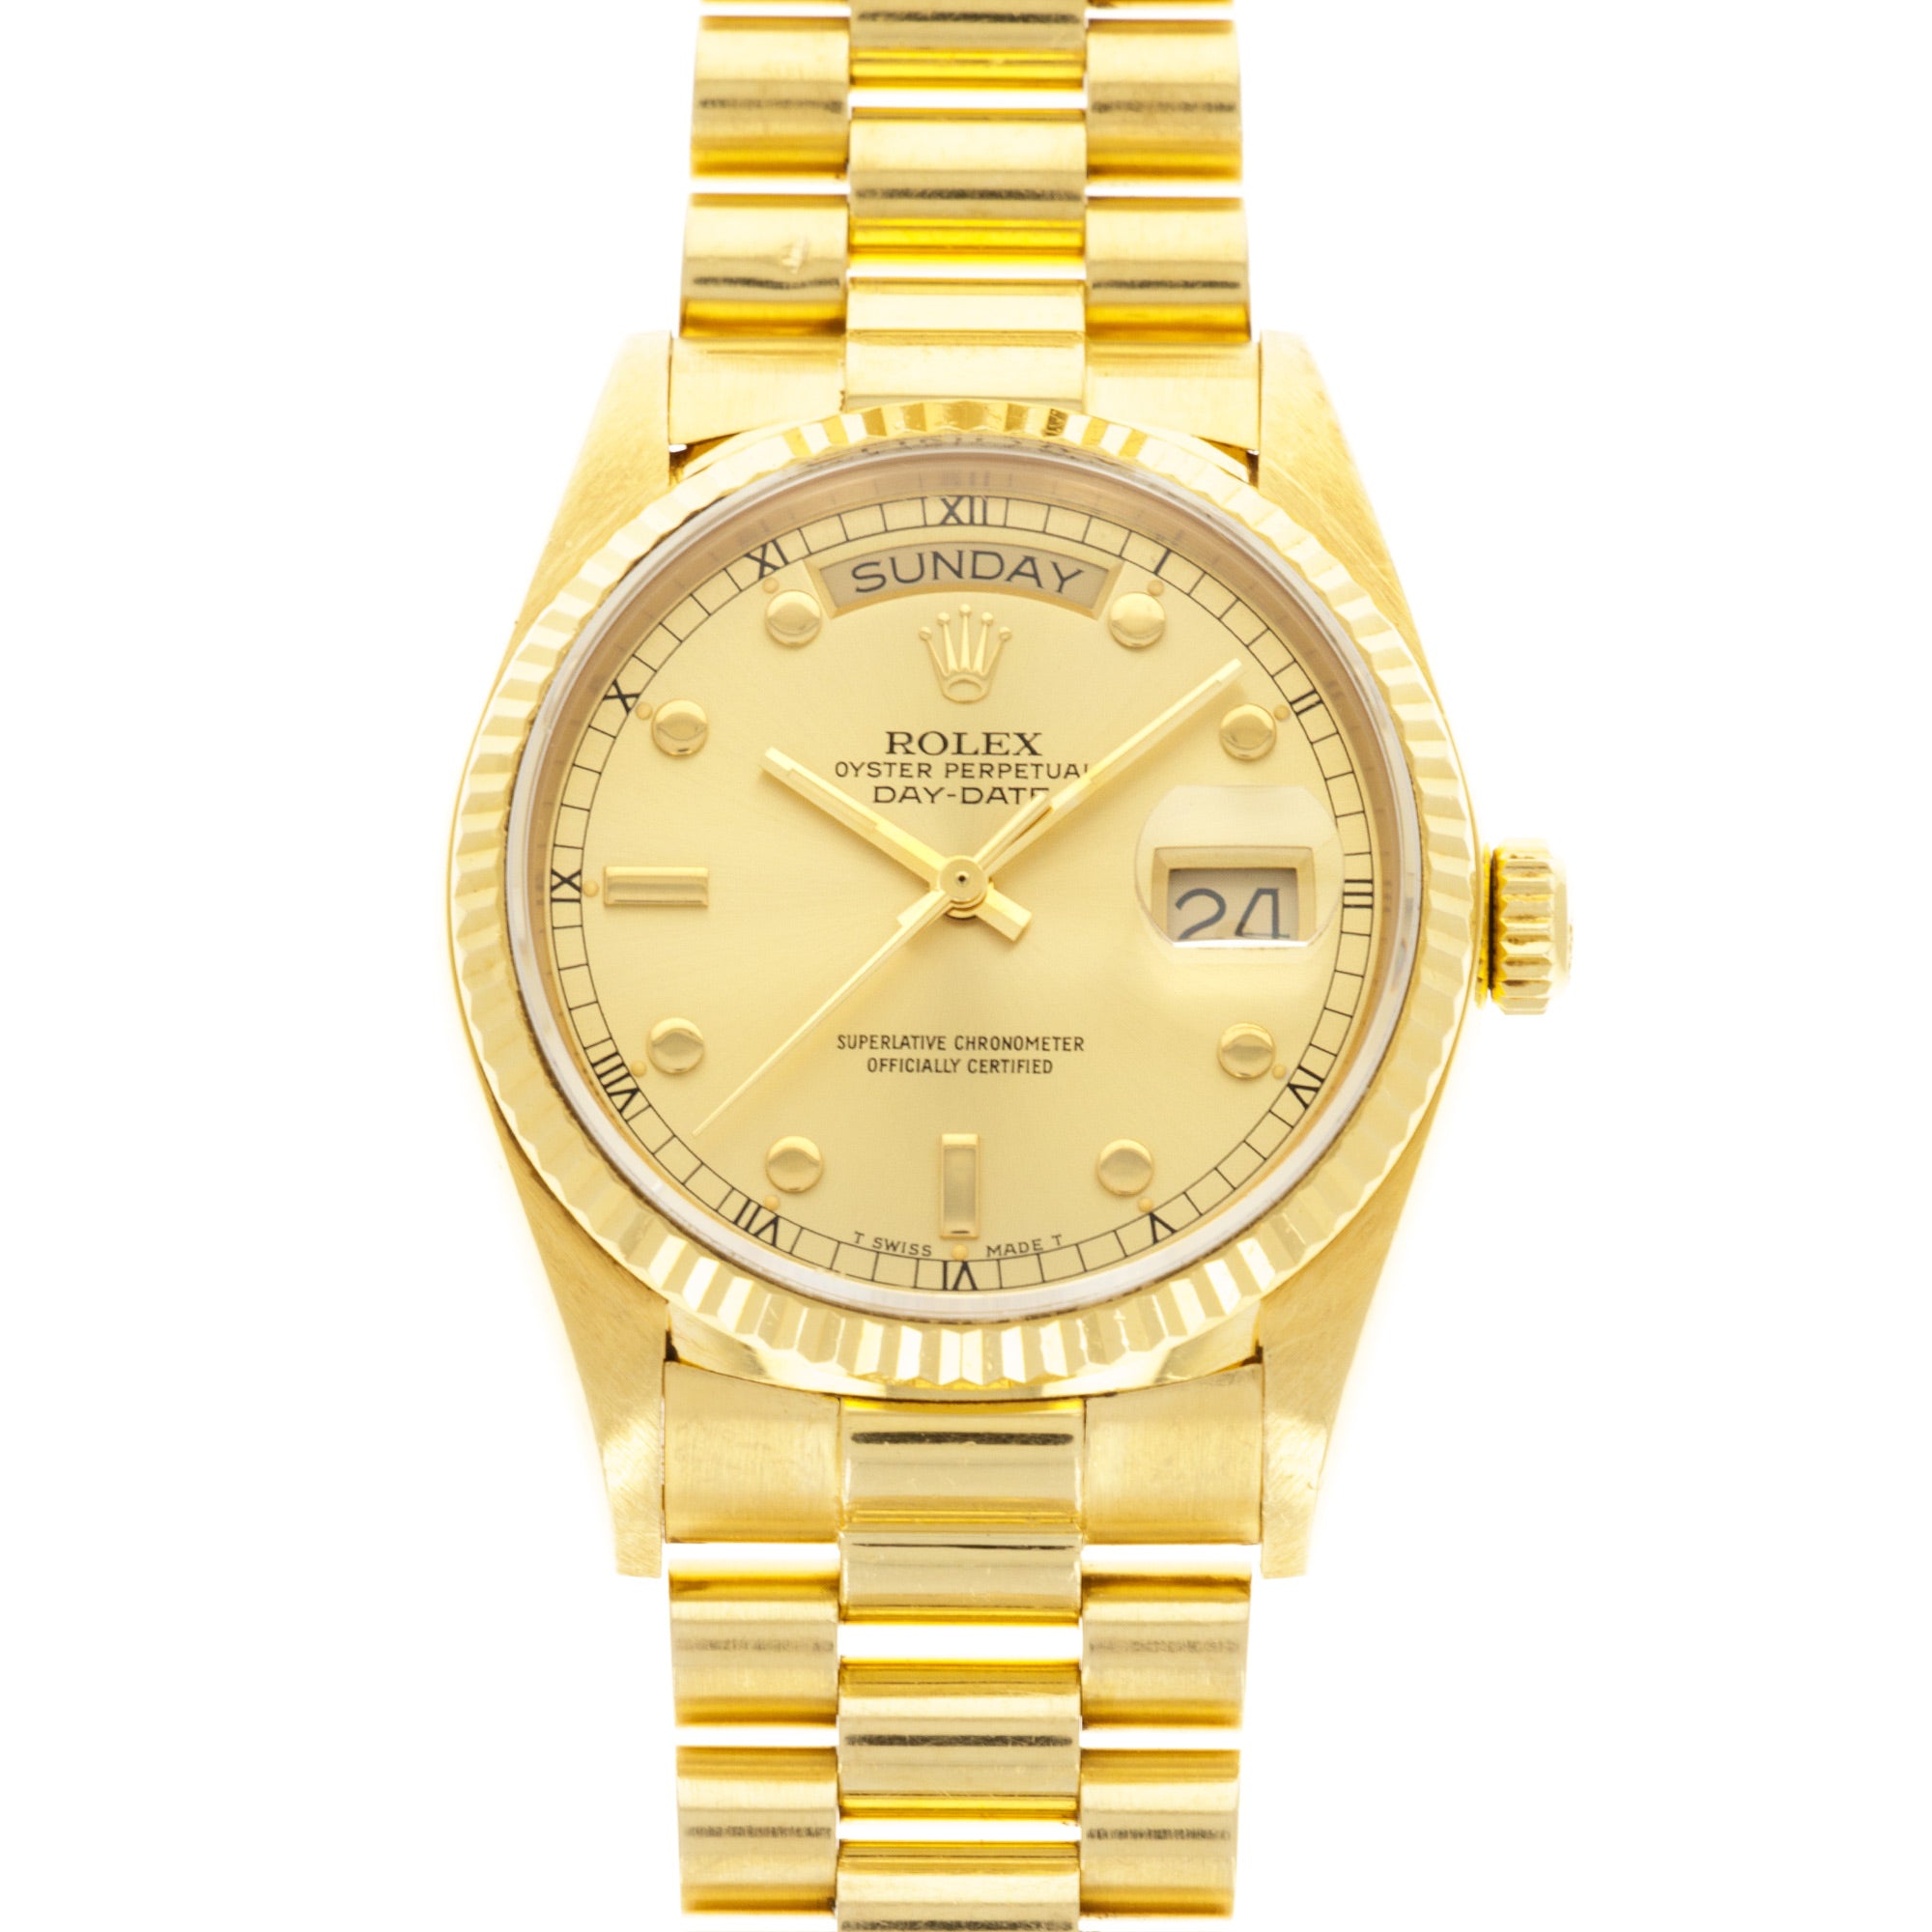 Rolex - Rolex Yellow Gold Day-Date Ref. 18038 with Rare Pinball Dial - The Keystone Watches